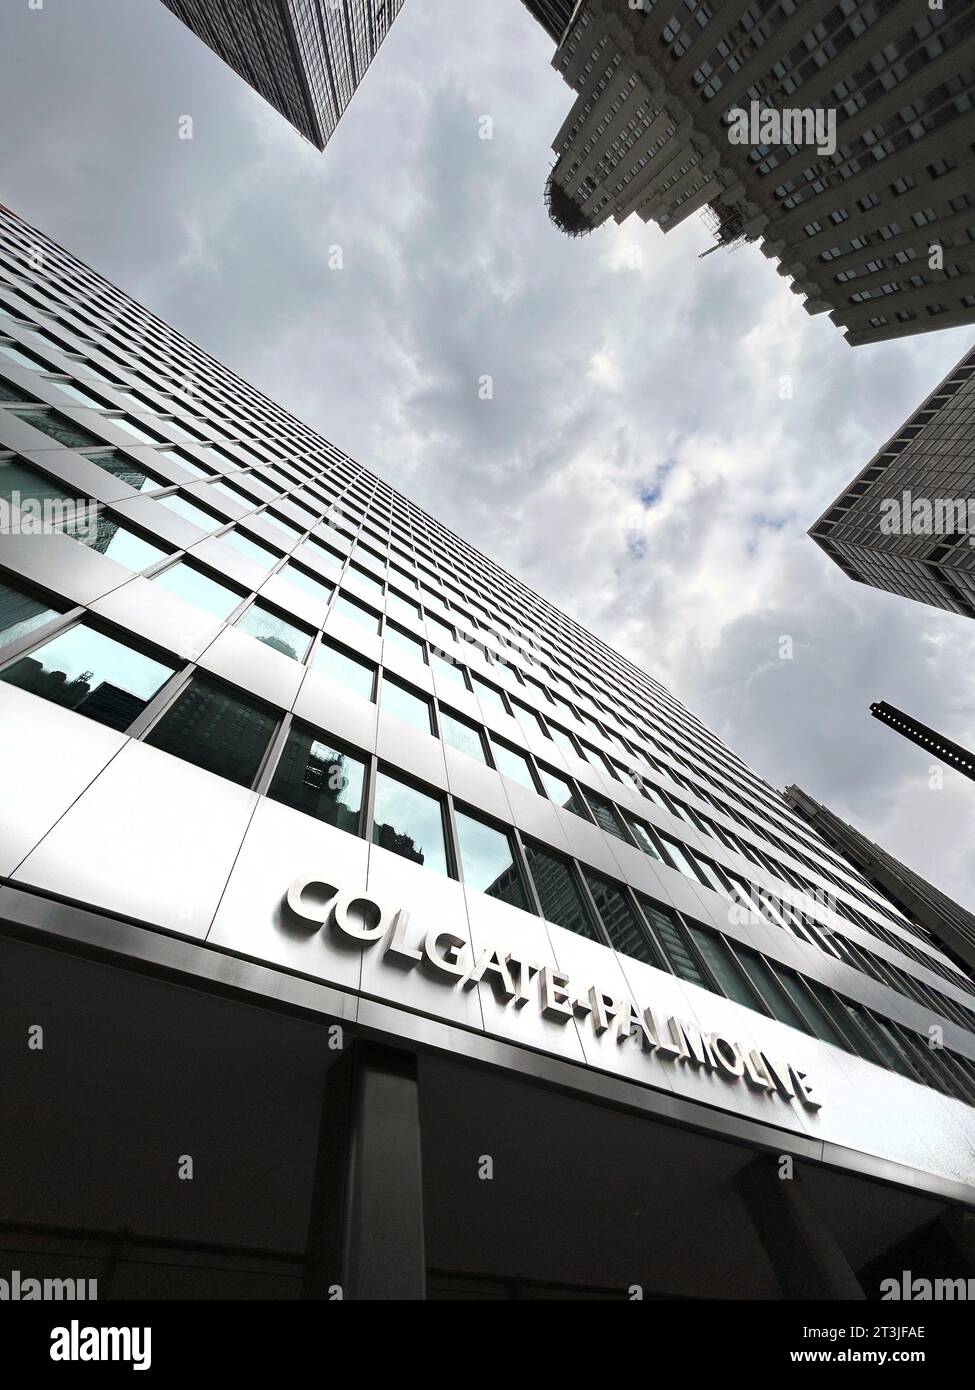 Low angle view of Colgate-Palmolive Corporate office building, Park Avenue, New York City, New York, USA Stock Photo